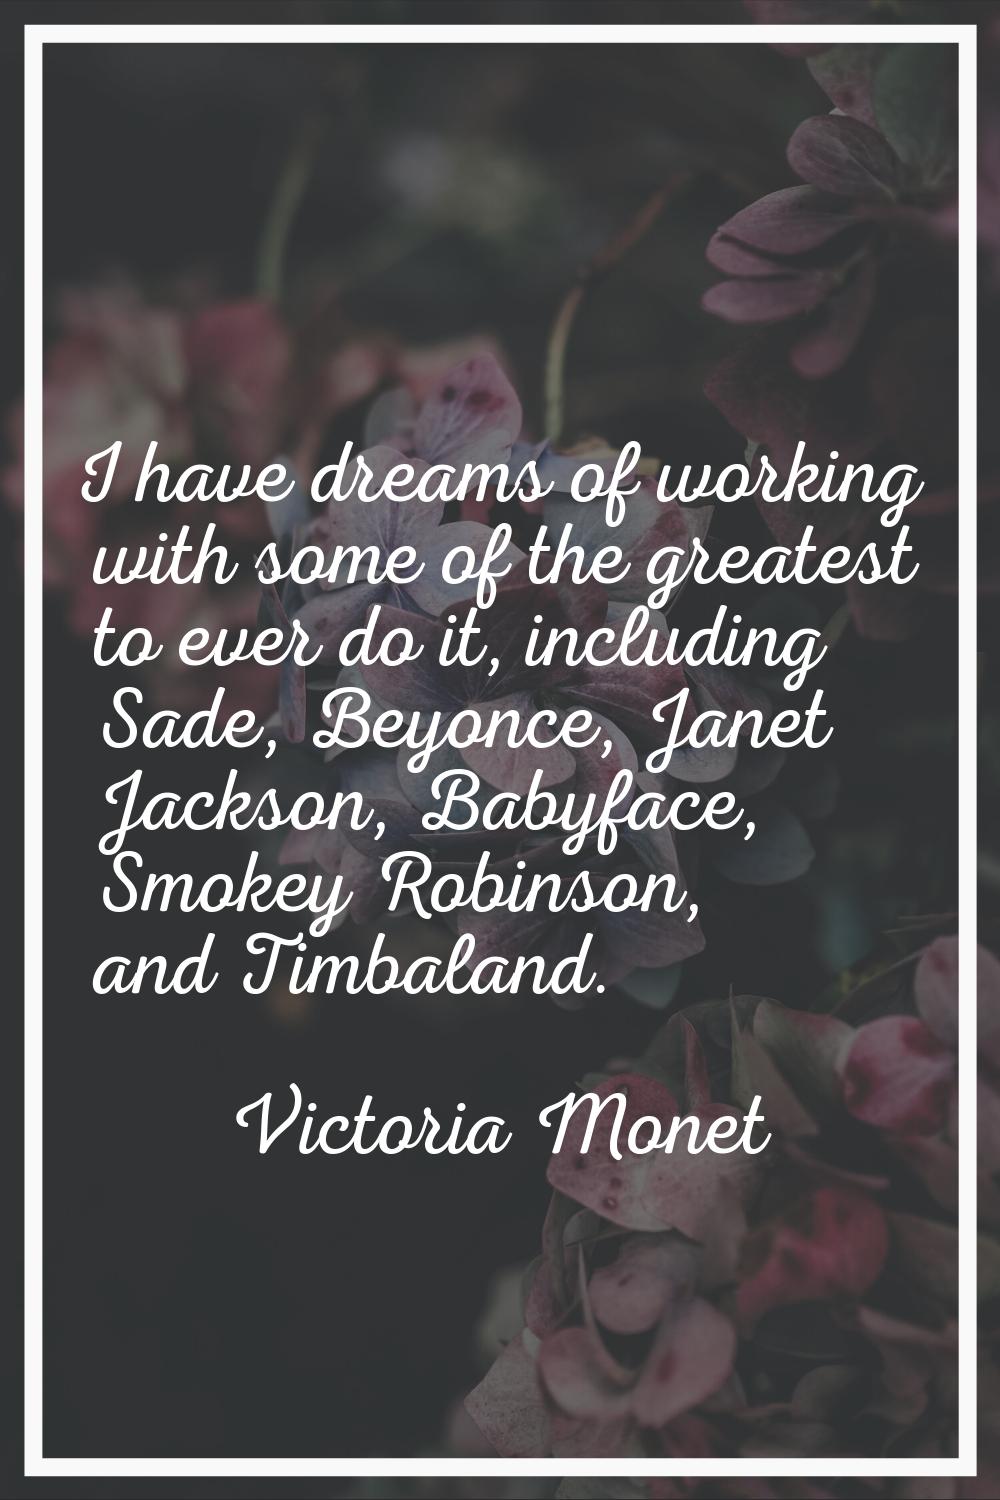 I have dreams of working with some of the greatest to ever do it, including Sade, Beyonce, Janet Ja